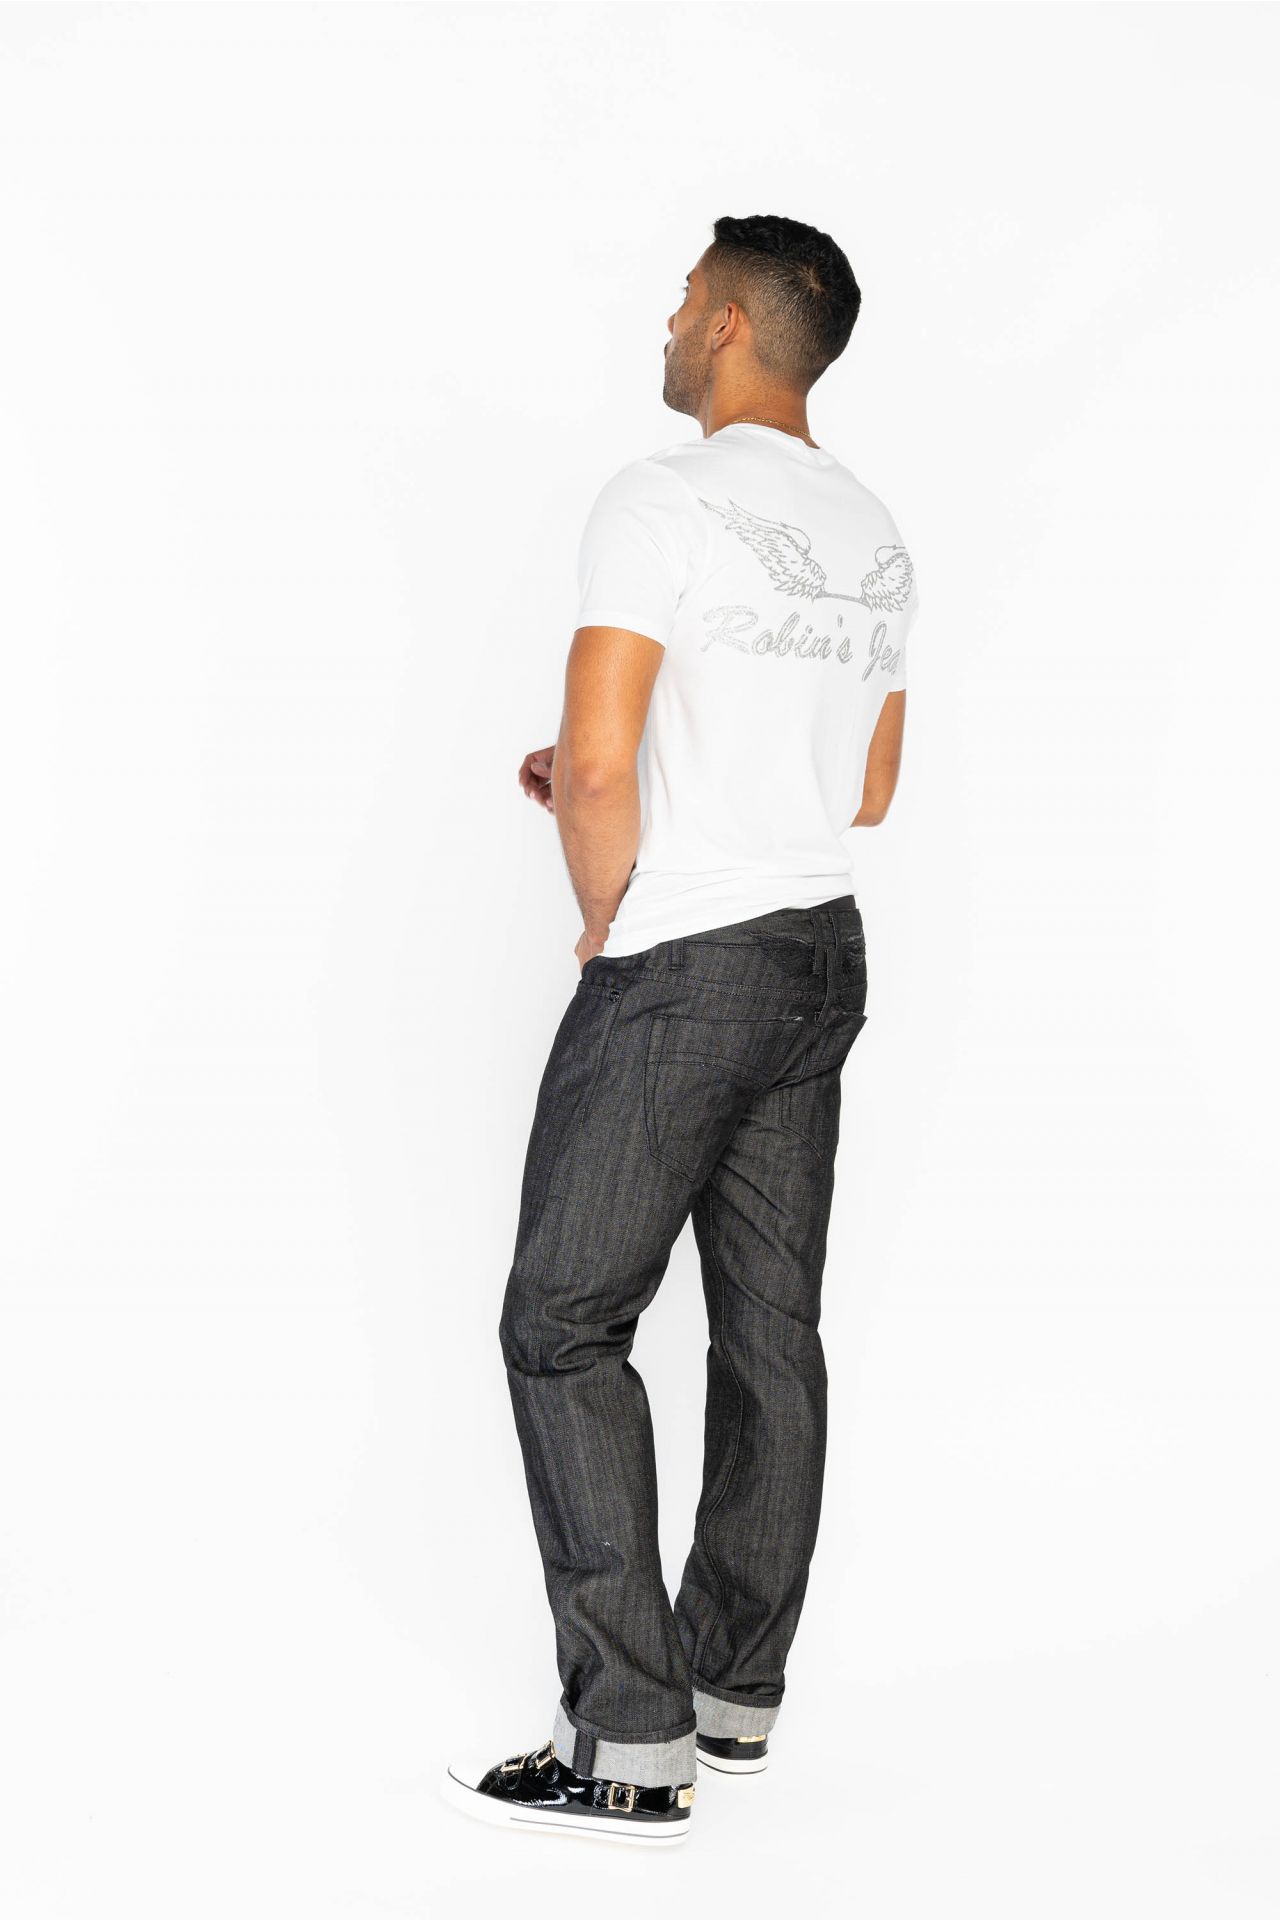 MENS CLASSIC STRAIGHT JEANS IN SPECIAL RAW WASH